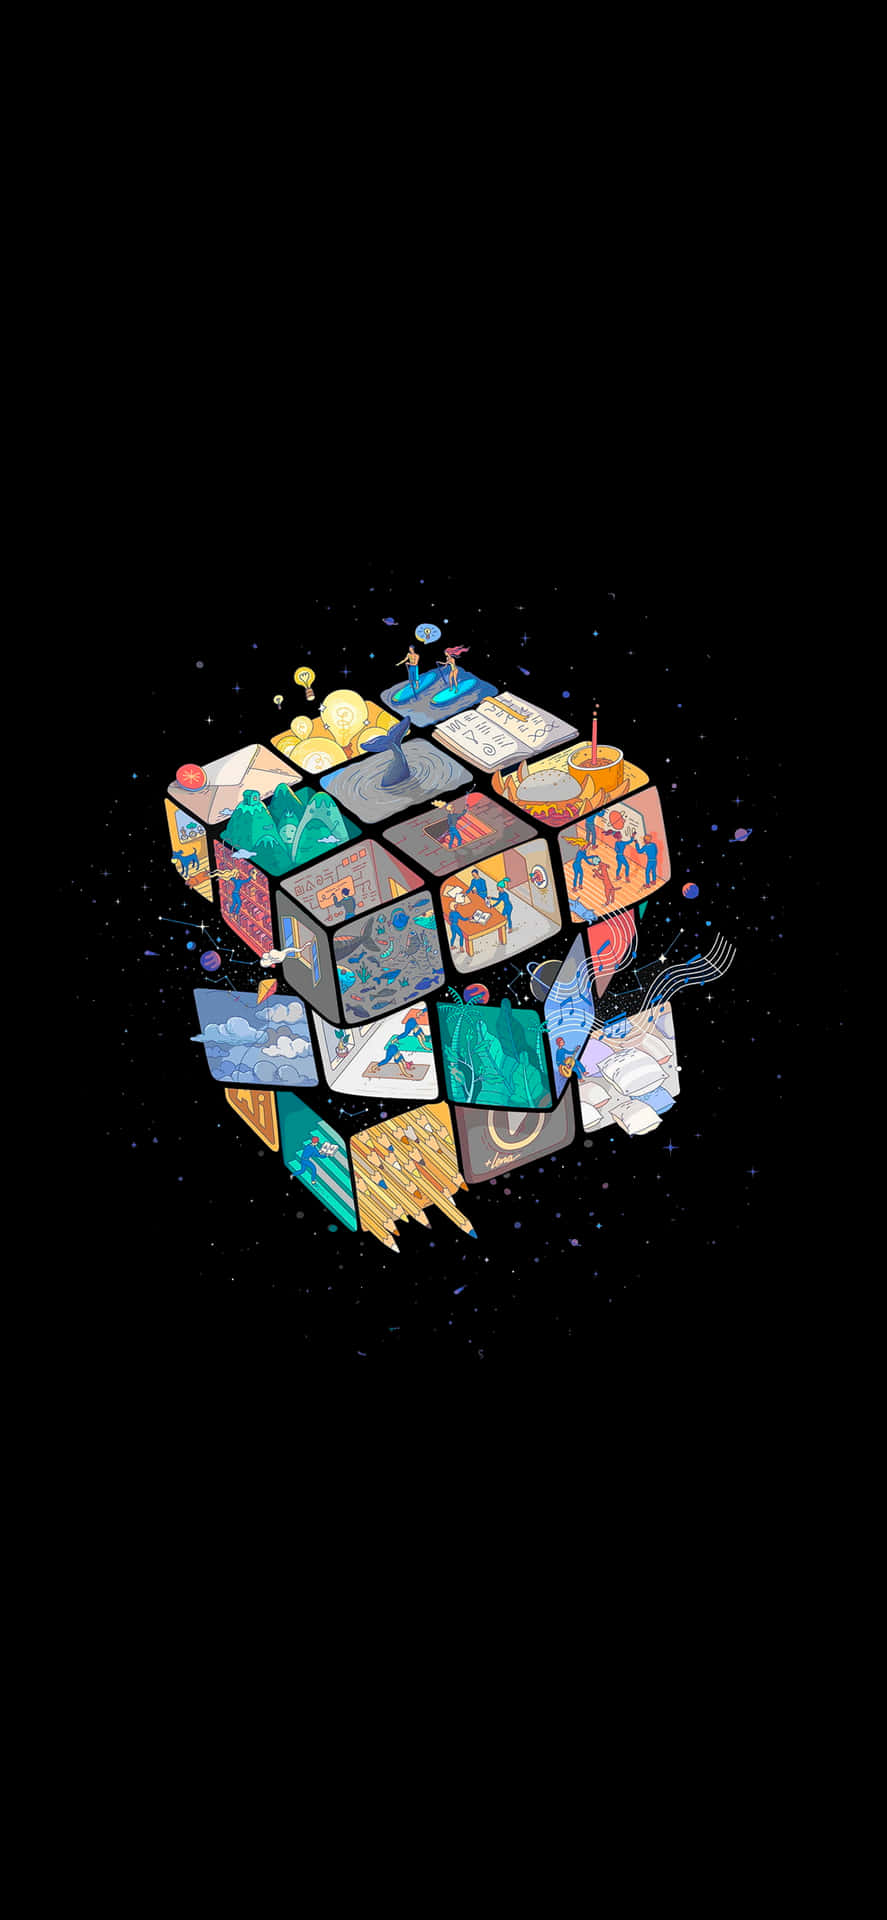 4k Amoled Background Rubik's Cube With Different Texture Blocks Background